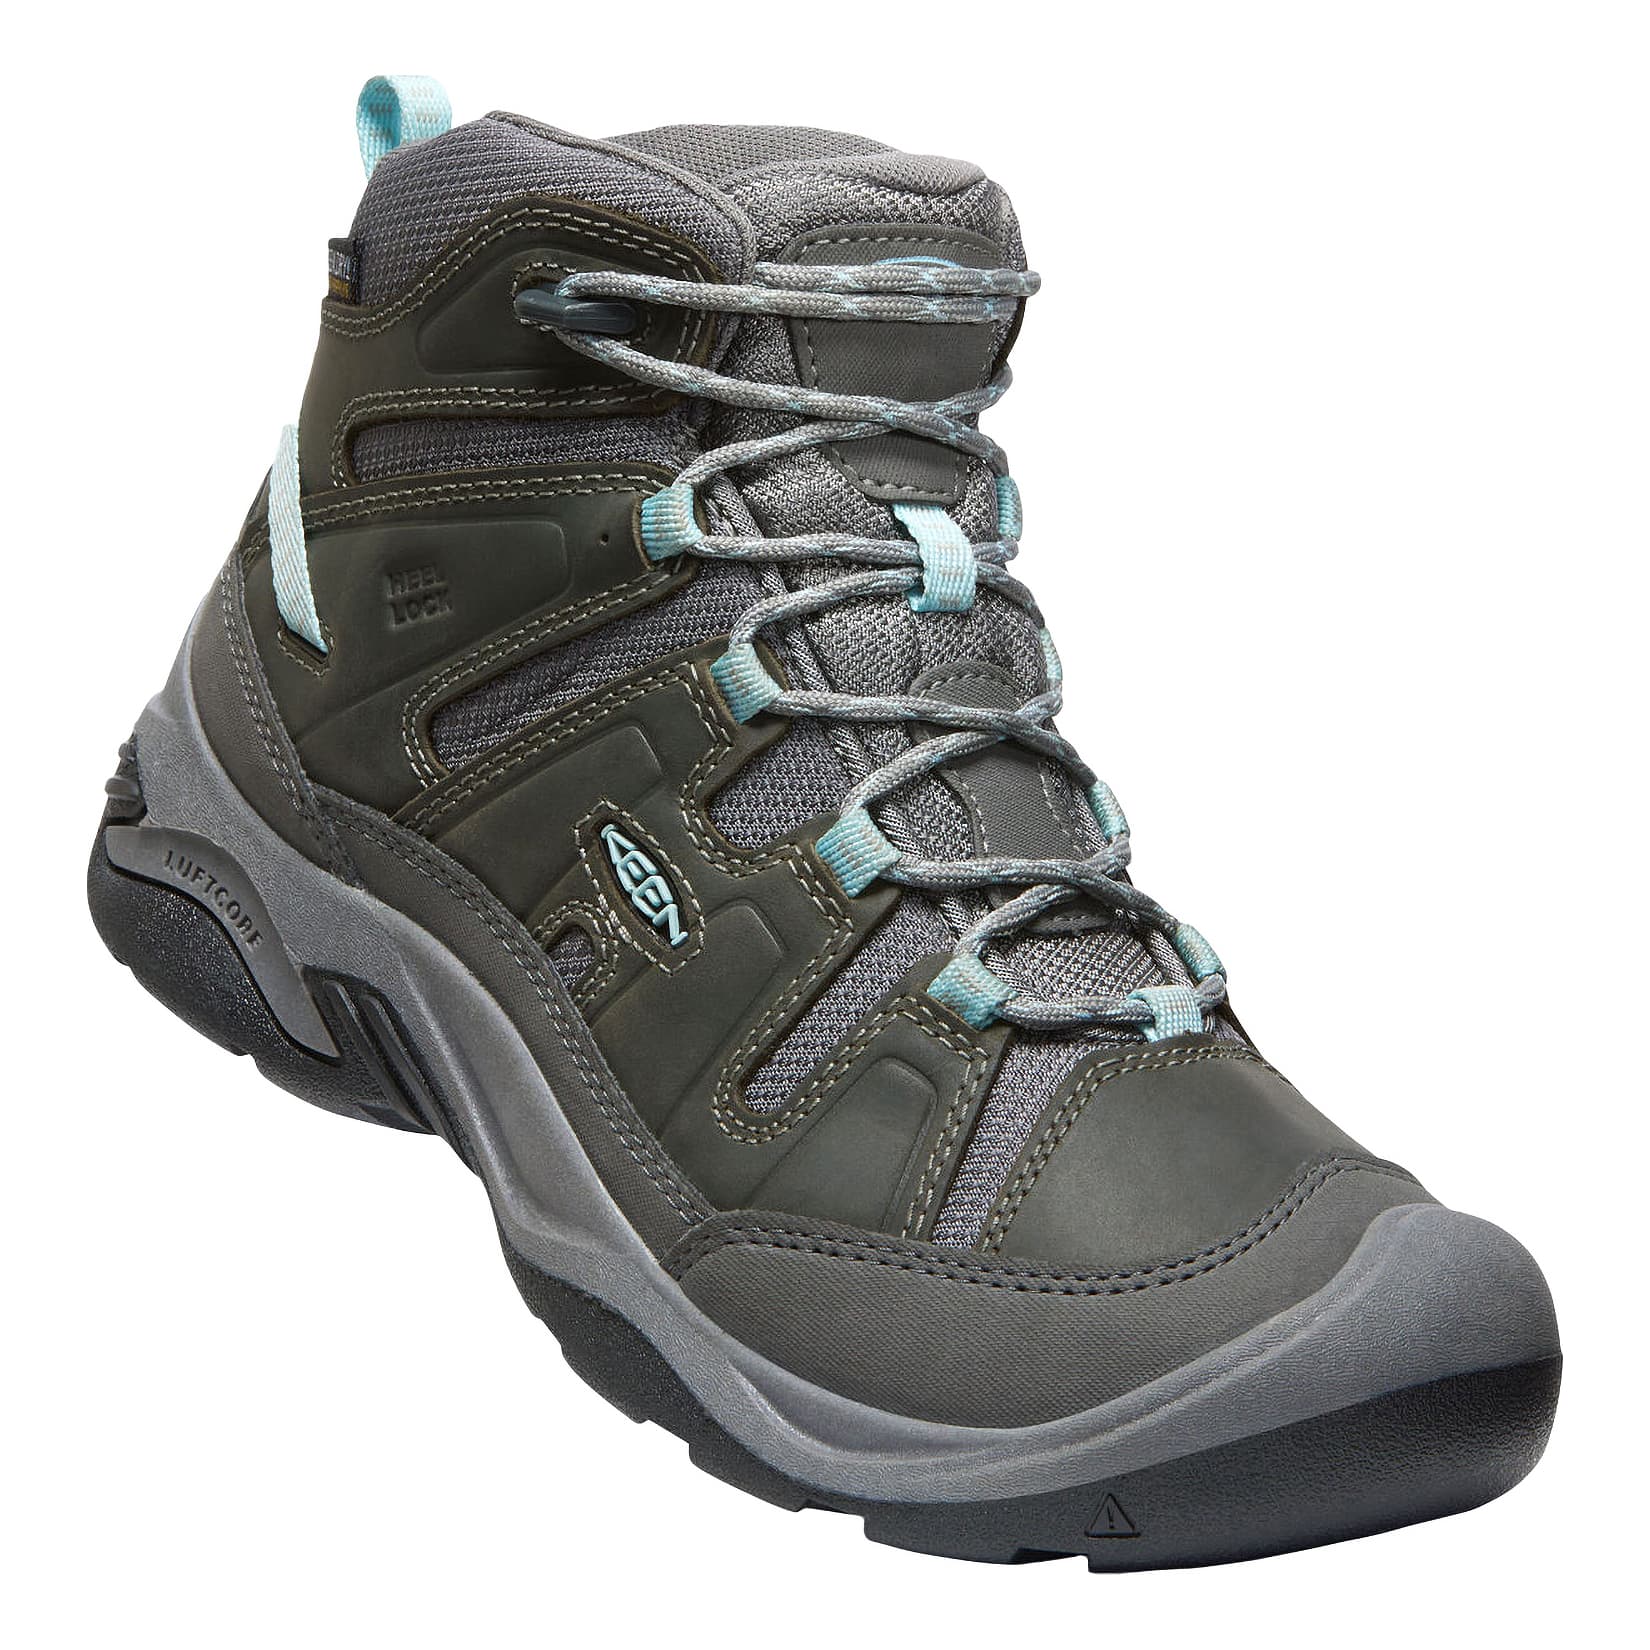 Murdoch's – Under Armour - Men's Charged Bandit Trail 2 Storm